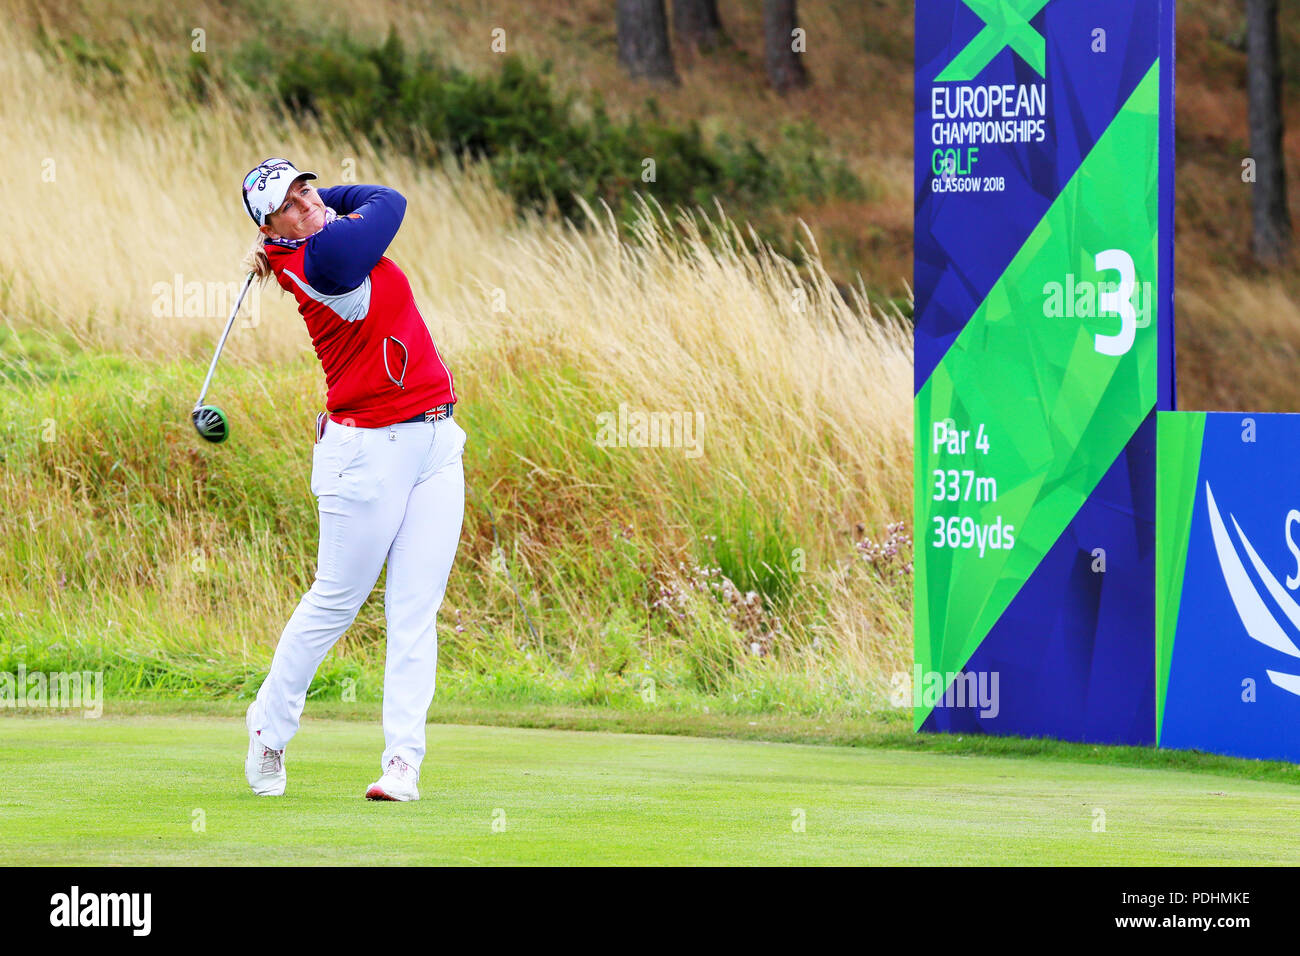 Gleneagles, Scotland, UK. 10th August, 2018. The Fourball Match Play continues with the pairing of Catriona Matthew and Holly Clyburn representing Great britain playing against Cajsa Persson and Linda Wessberg of Sweden. Clyburn teeing off at the third Credit: Findlay/Alamy Live News Stock Photo